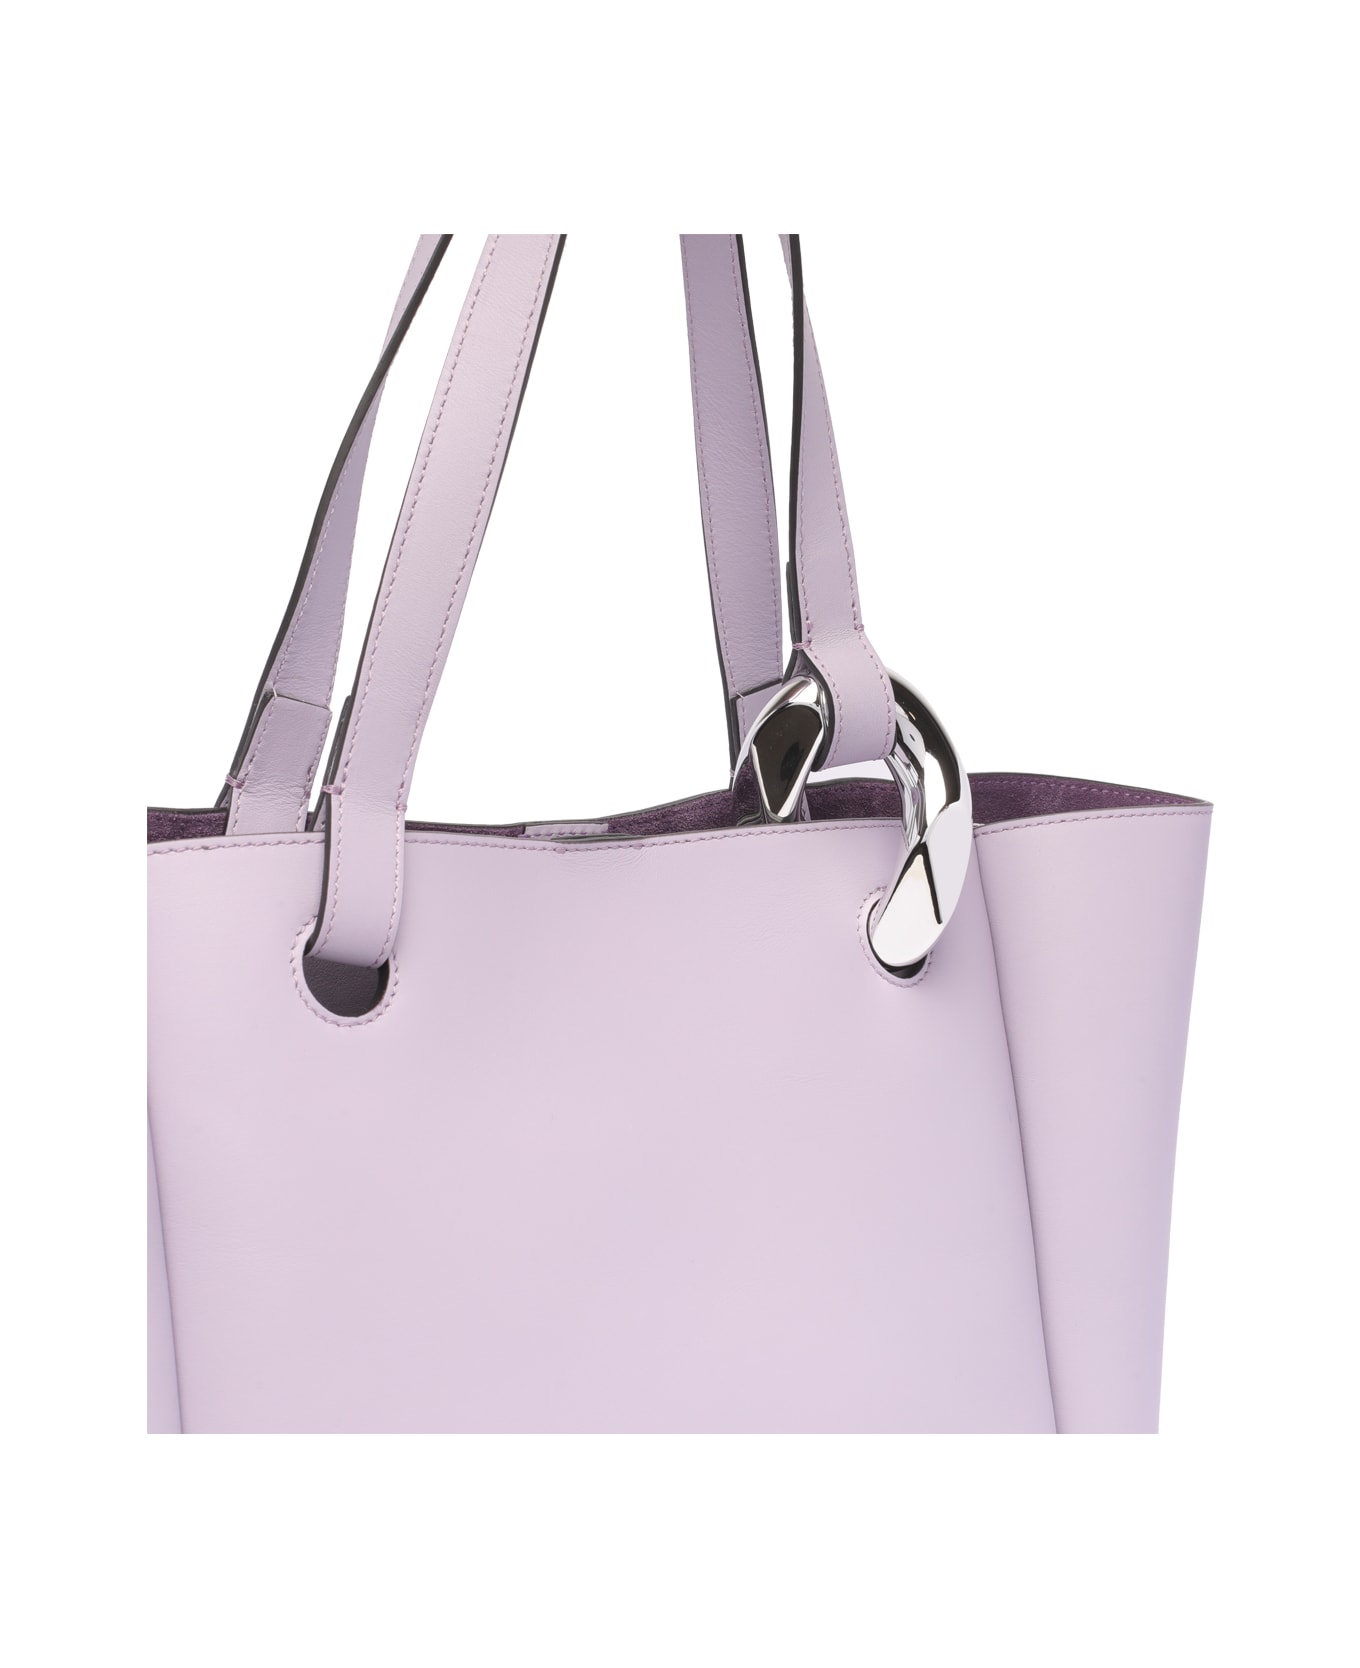 J.W. Anderson Chain Cabas Hand Bag - Lilac トートバッグ